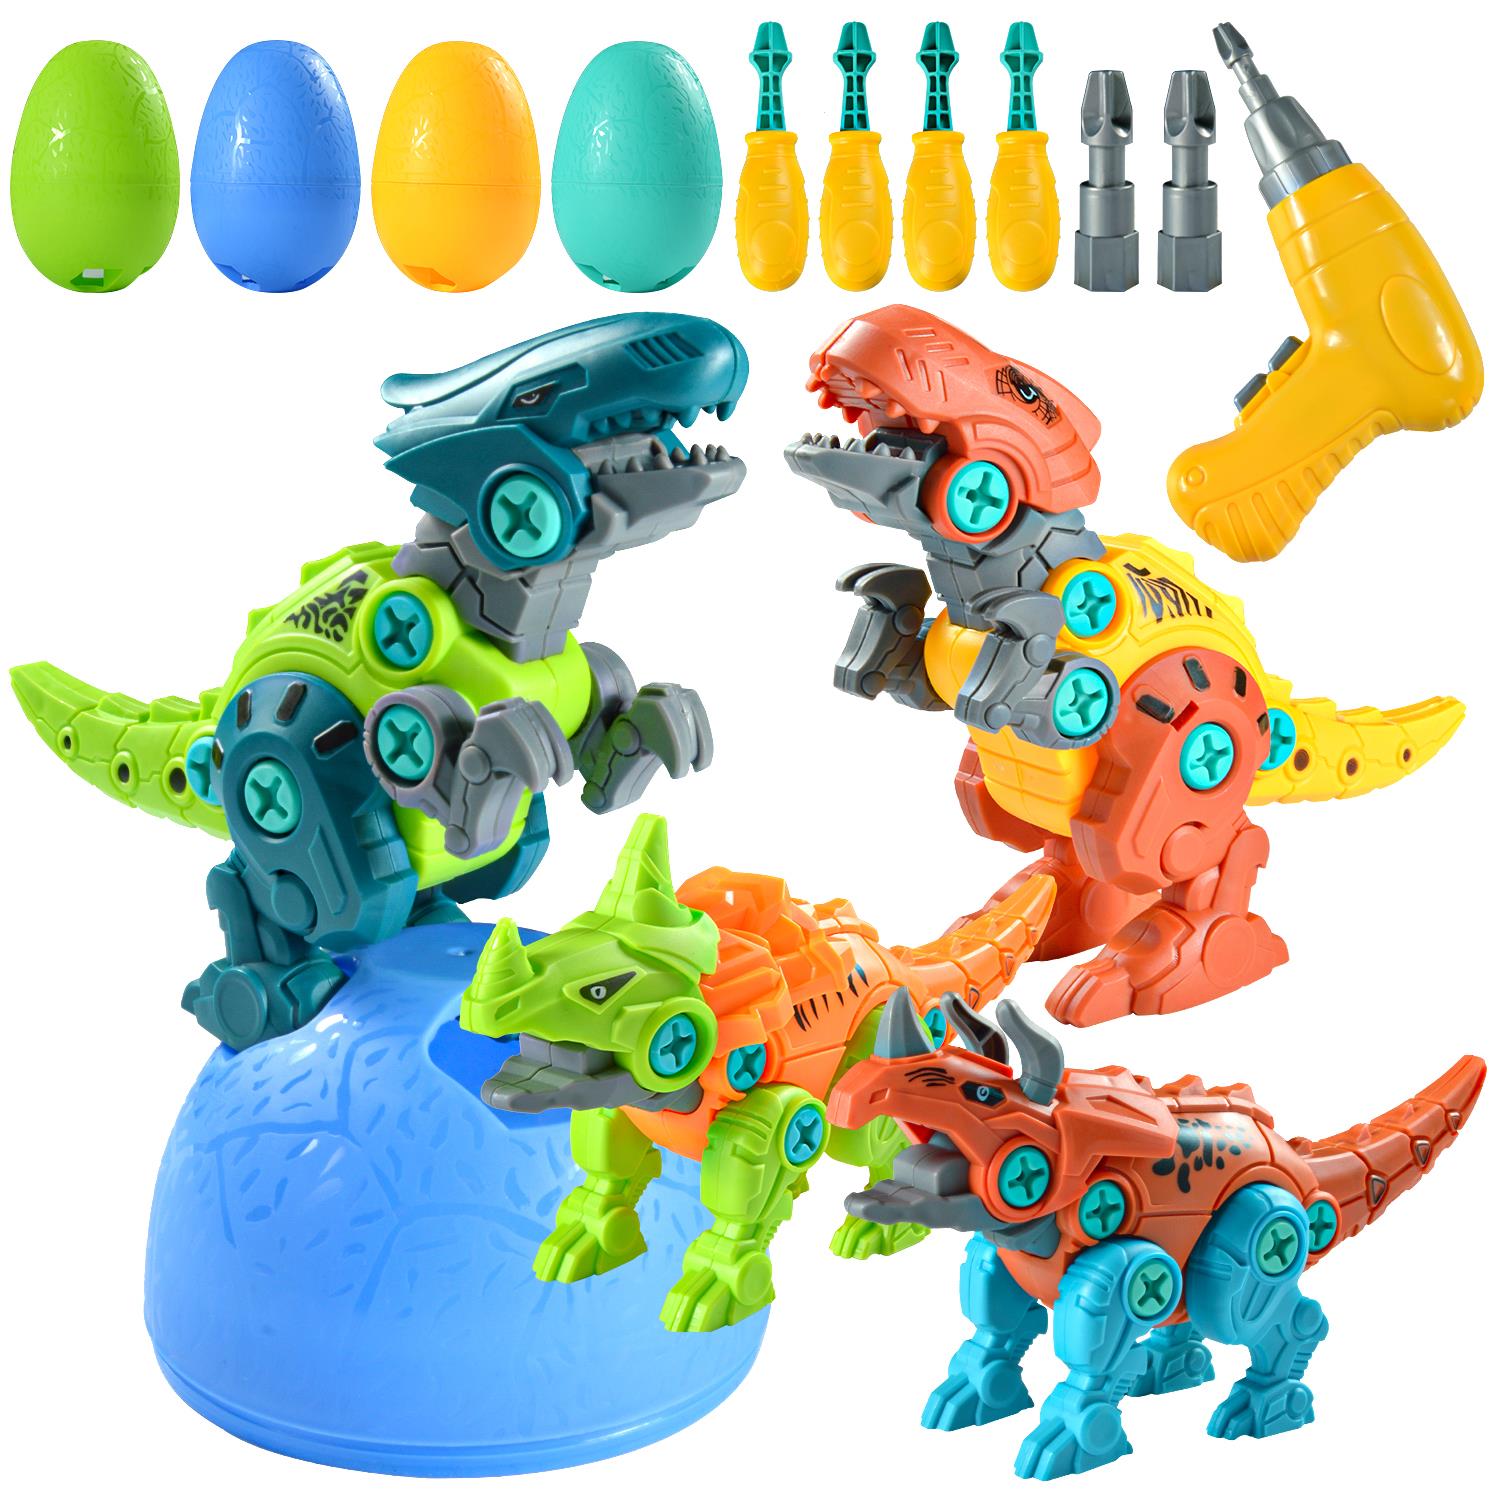 4 Packs Take Apart Dinosaur Toys for Kids,Building Toys Set with Plastic Screwdriver Play Kit